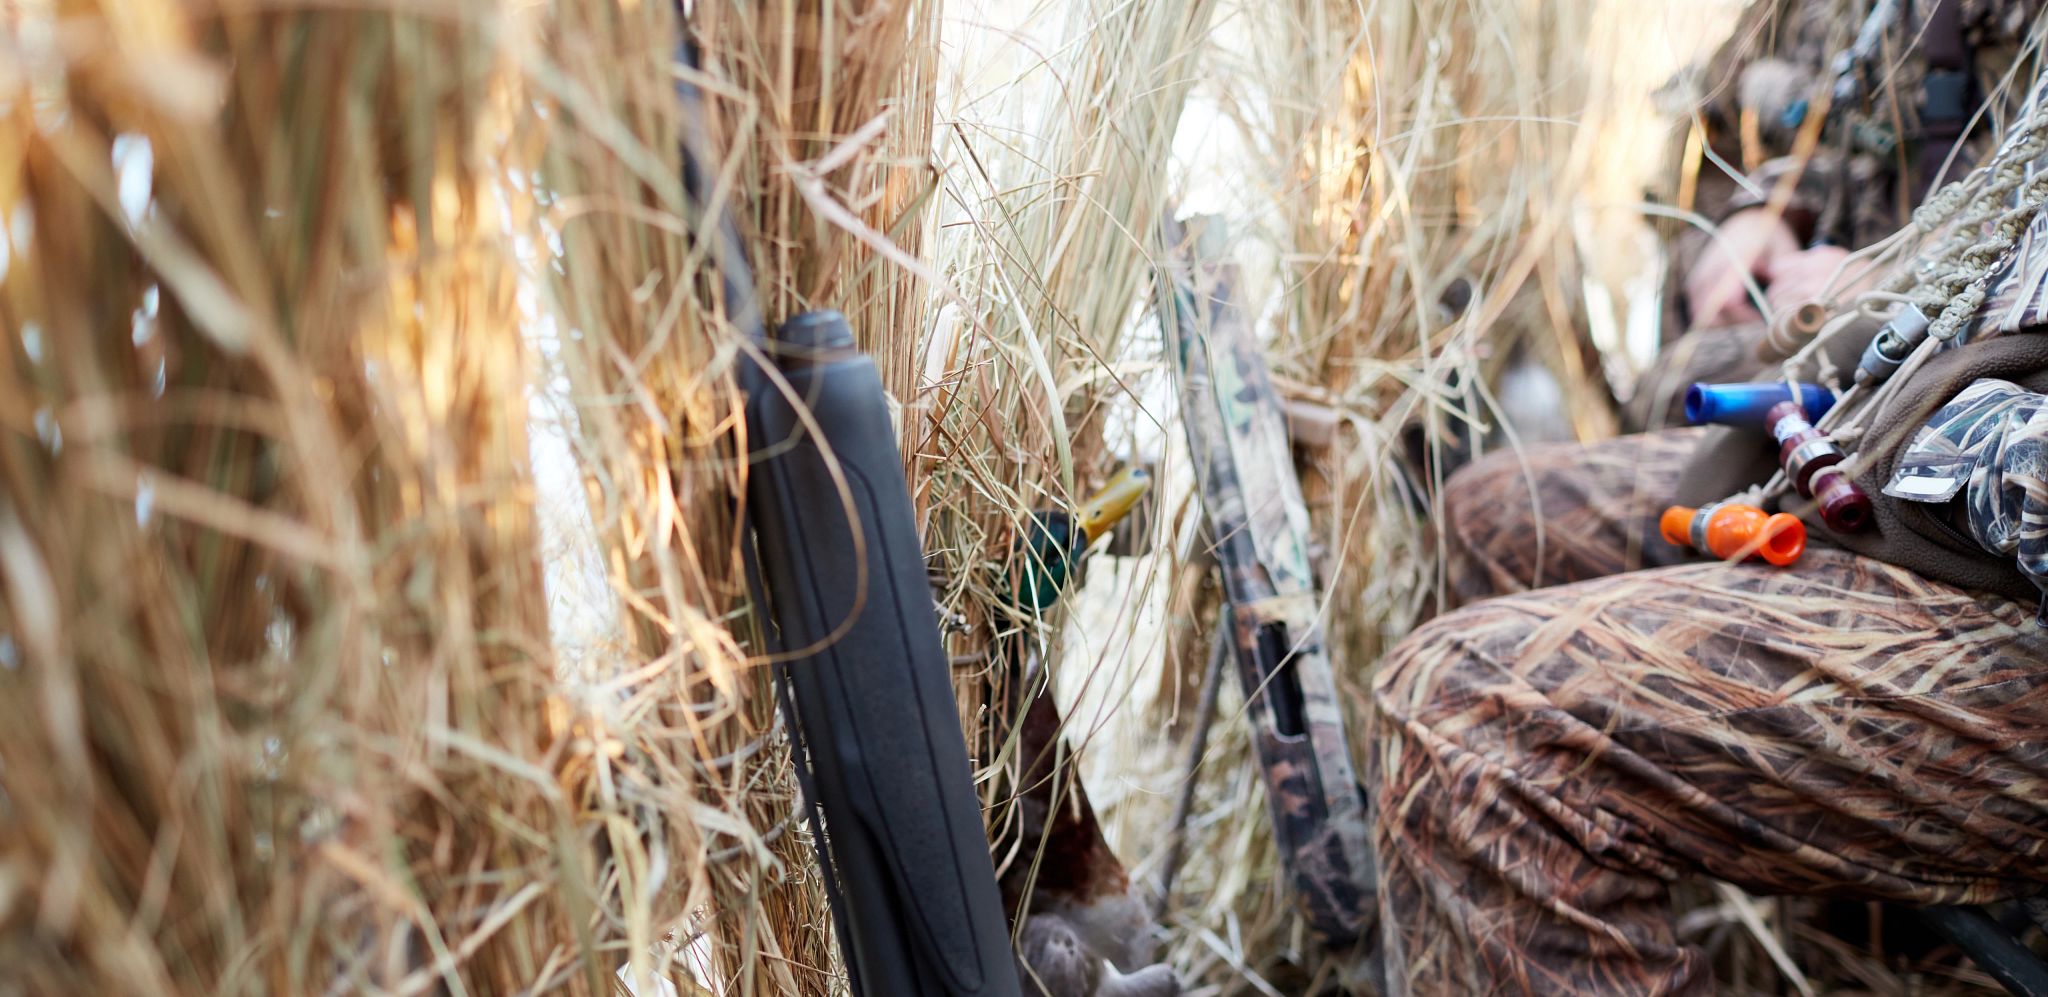 Hunters-waiting-inside-a-blind-or-hind-on-a-shoot-885759688_8660x5773.jpeg